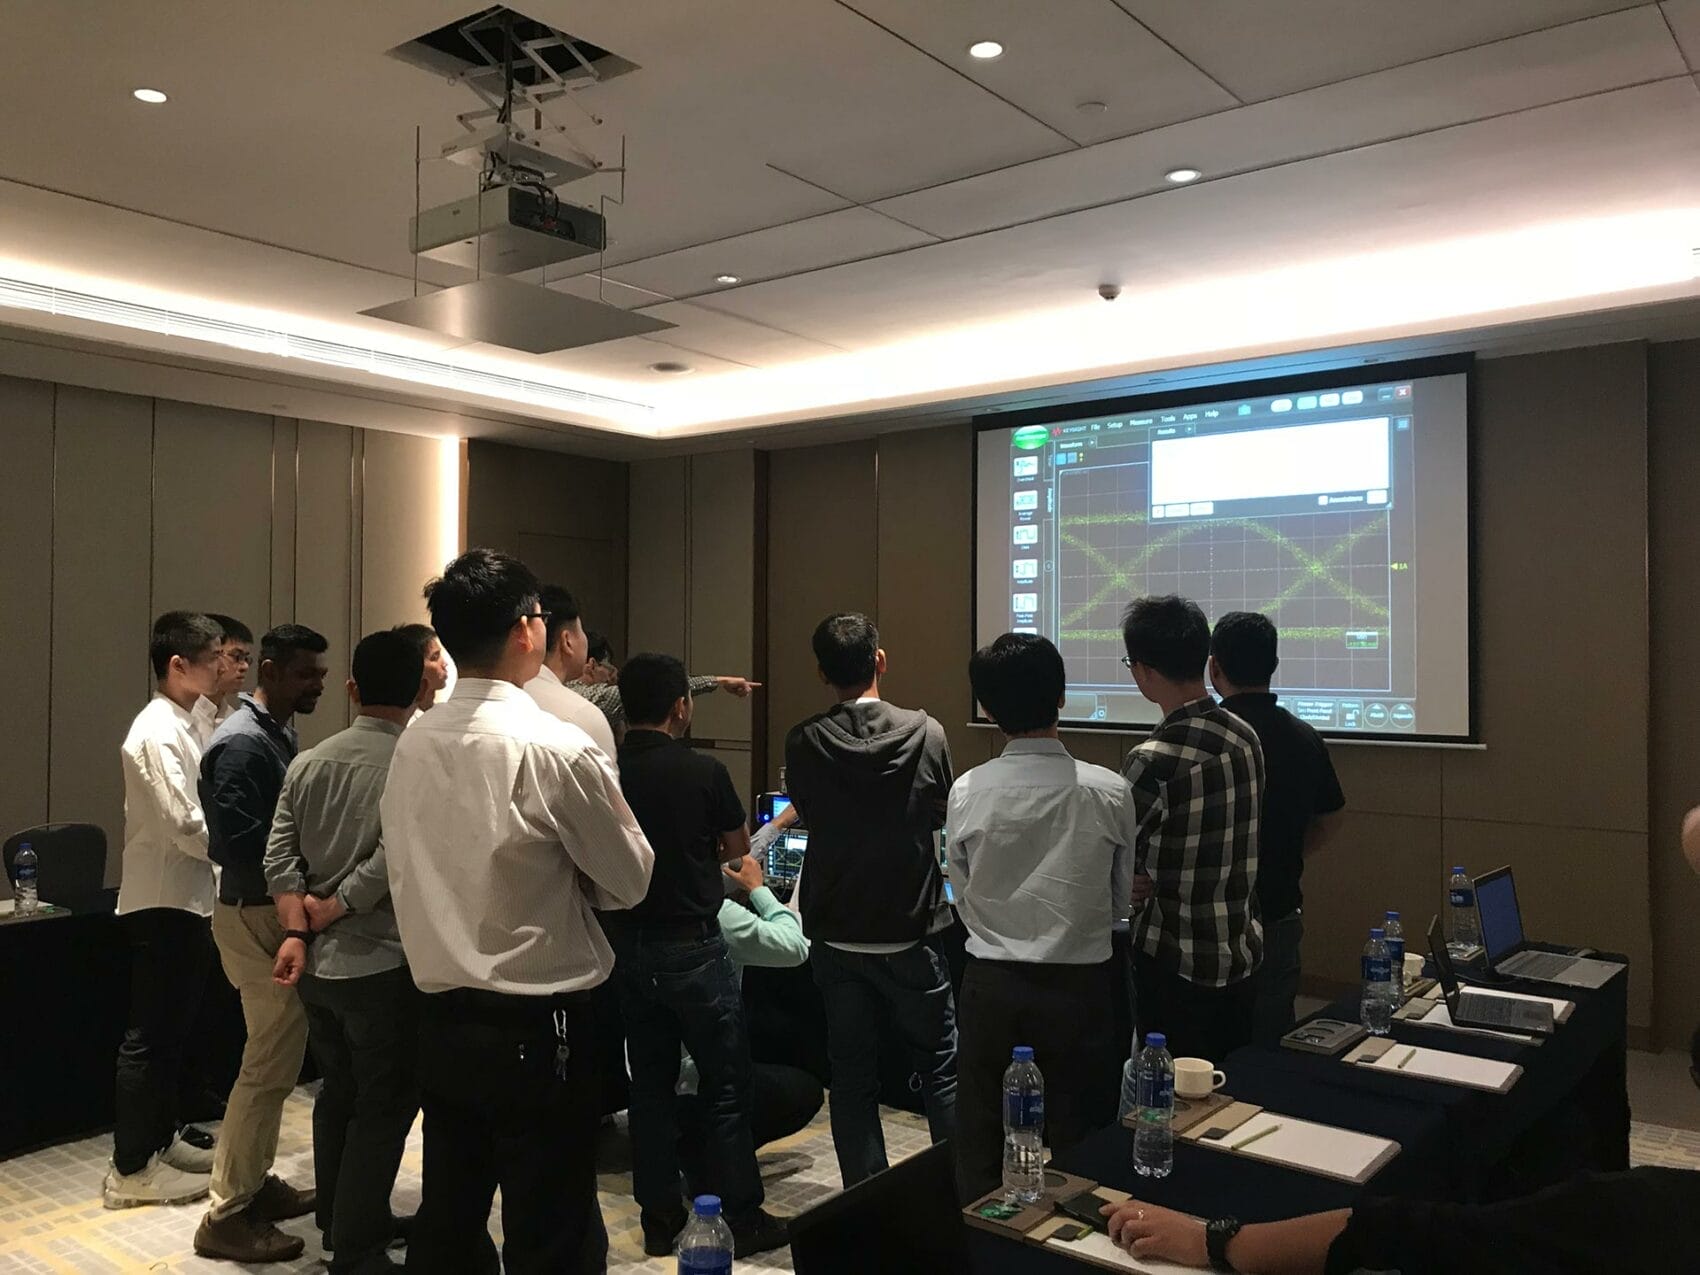 Technical training session presentation on projector